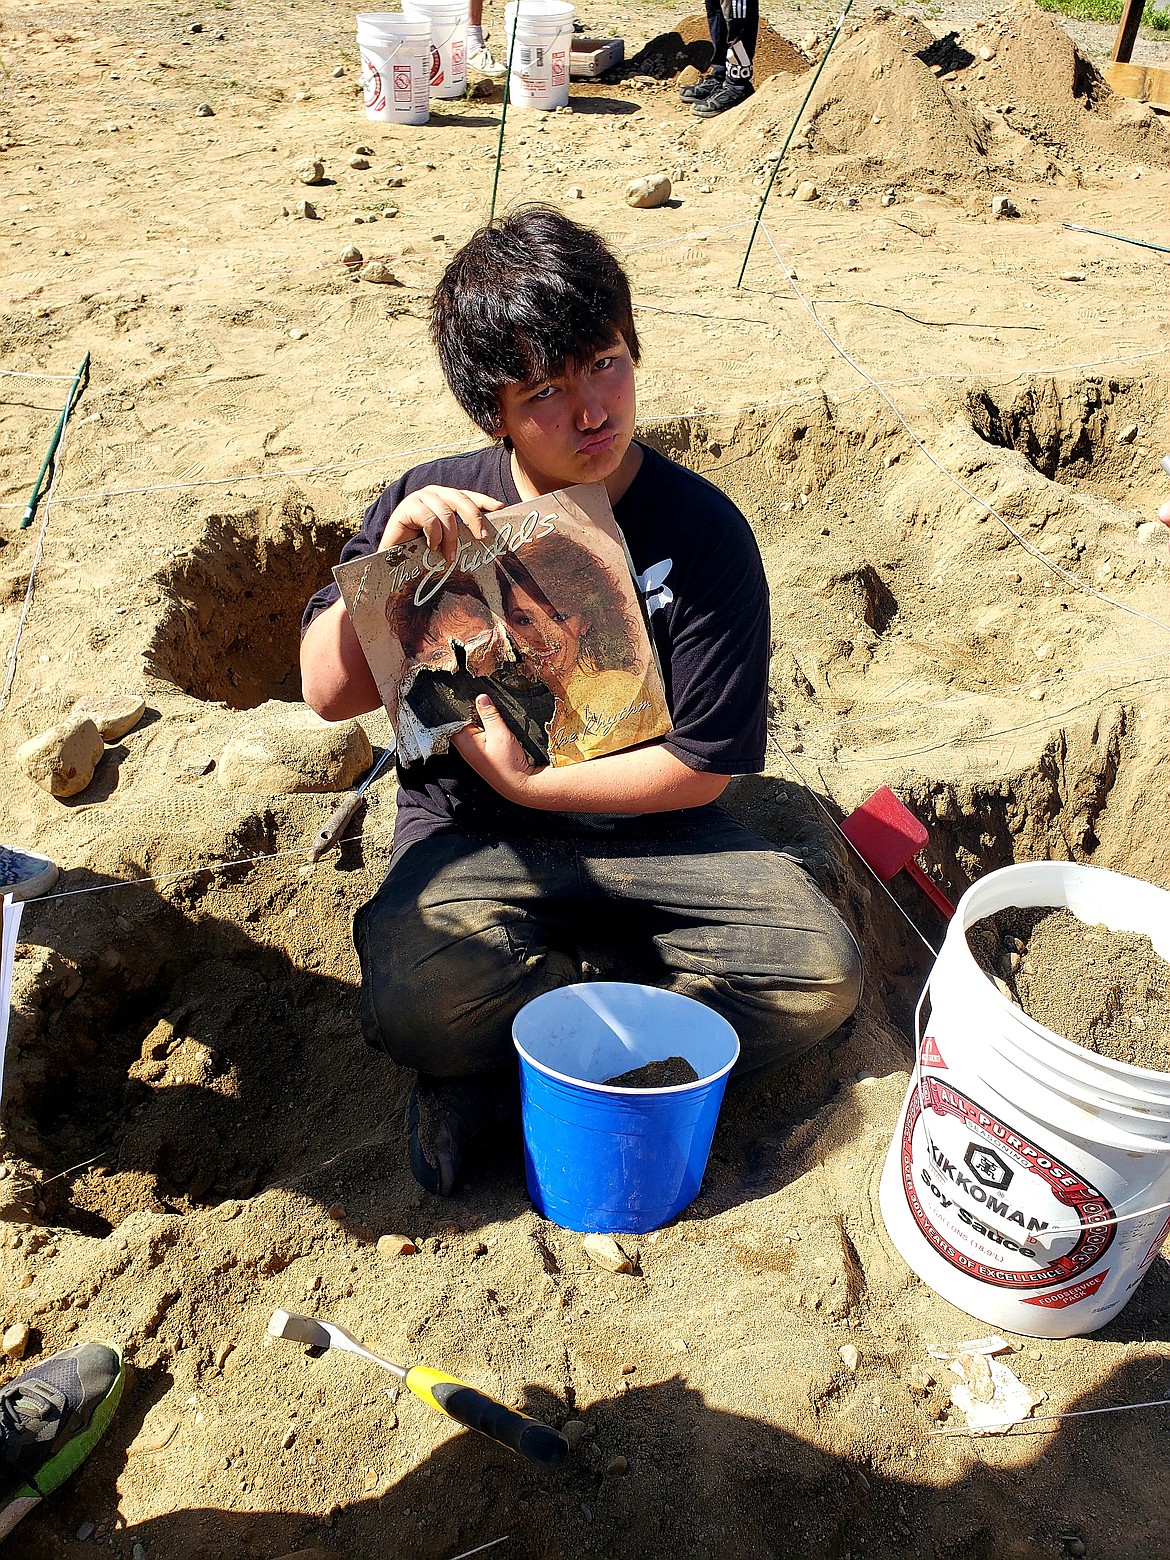 Eighth grader Geir Hull holds up an album he found while digging in an archeological plot at Timberlake Middle School Tuesday.